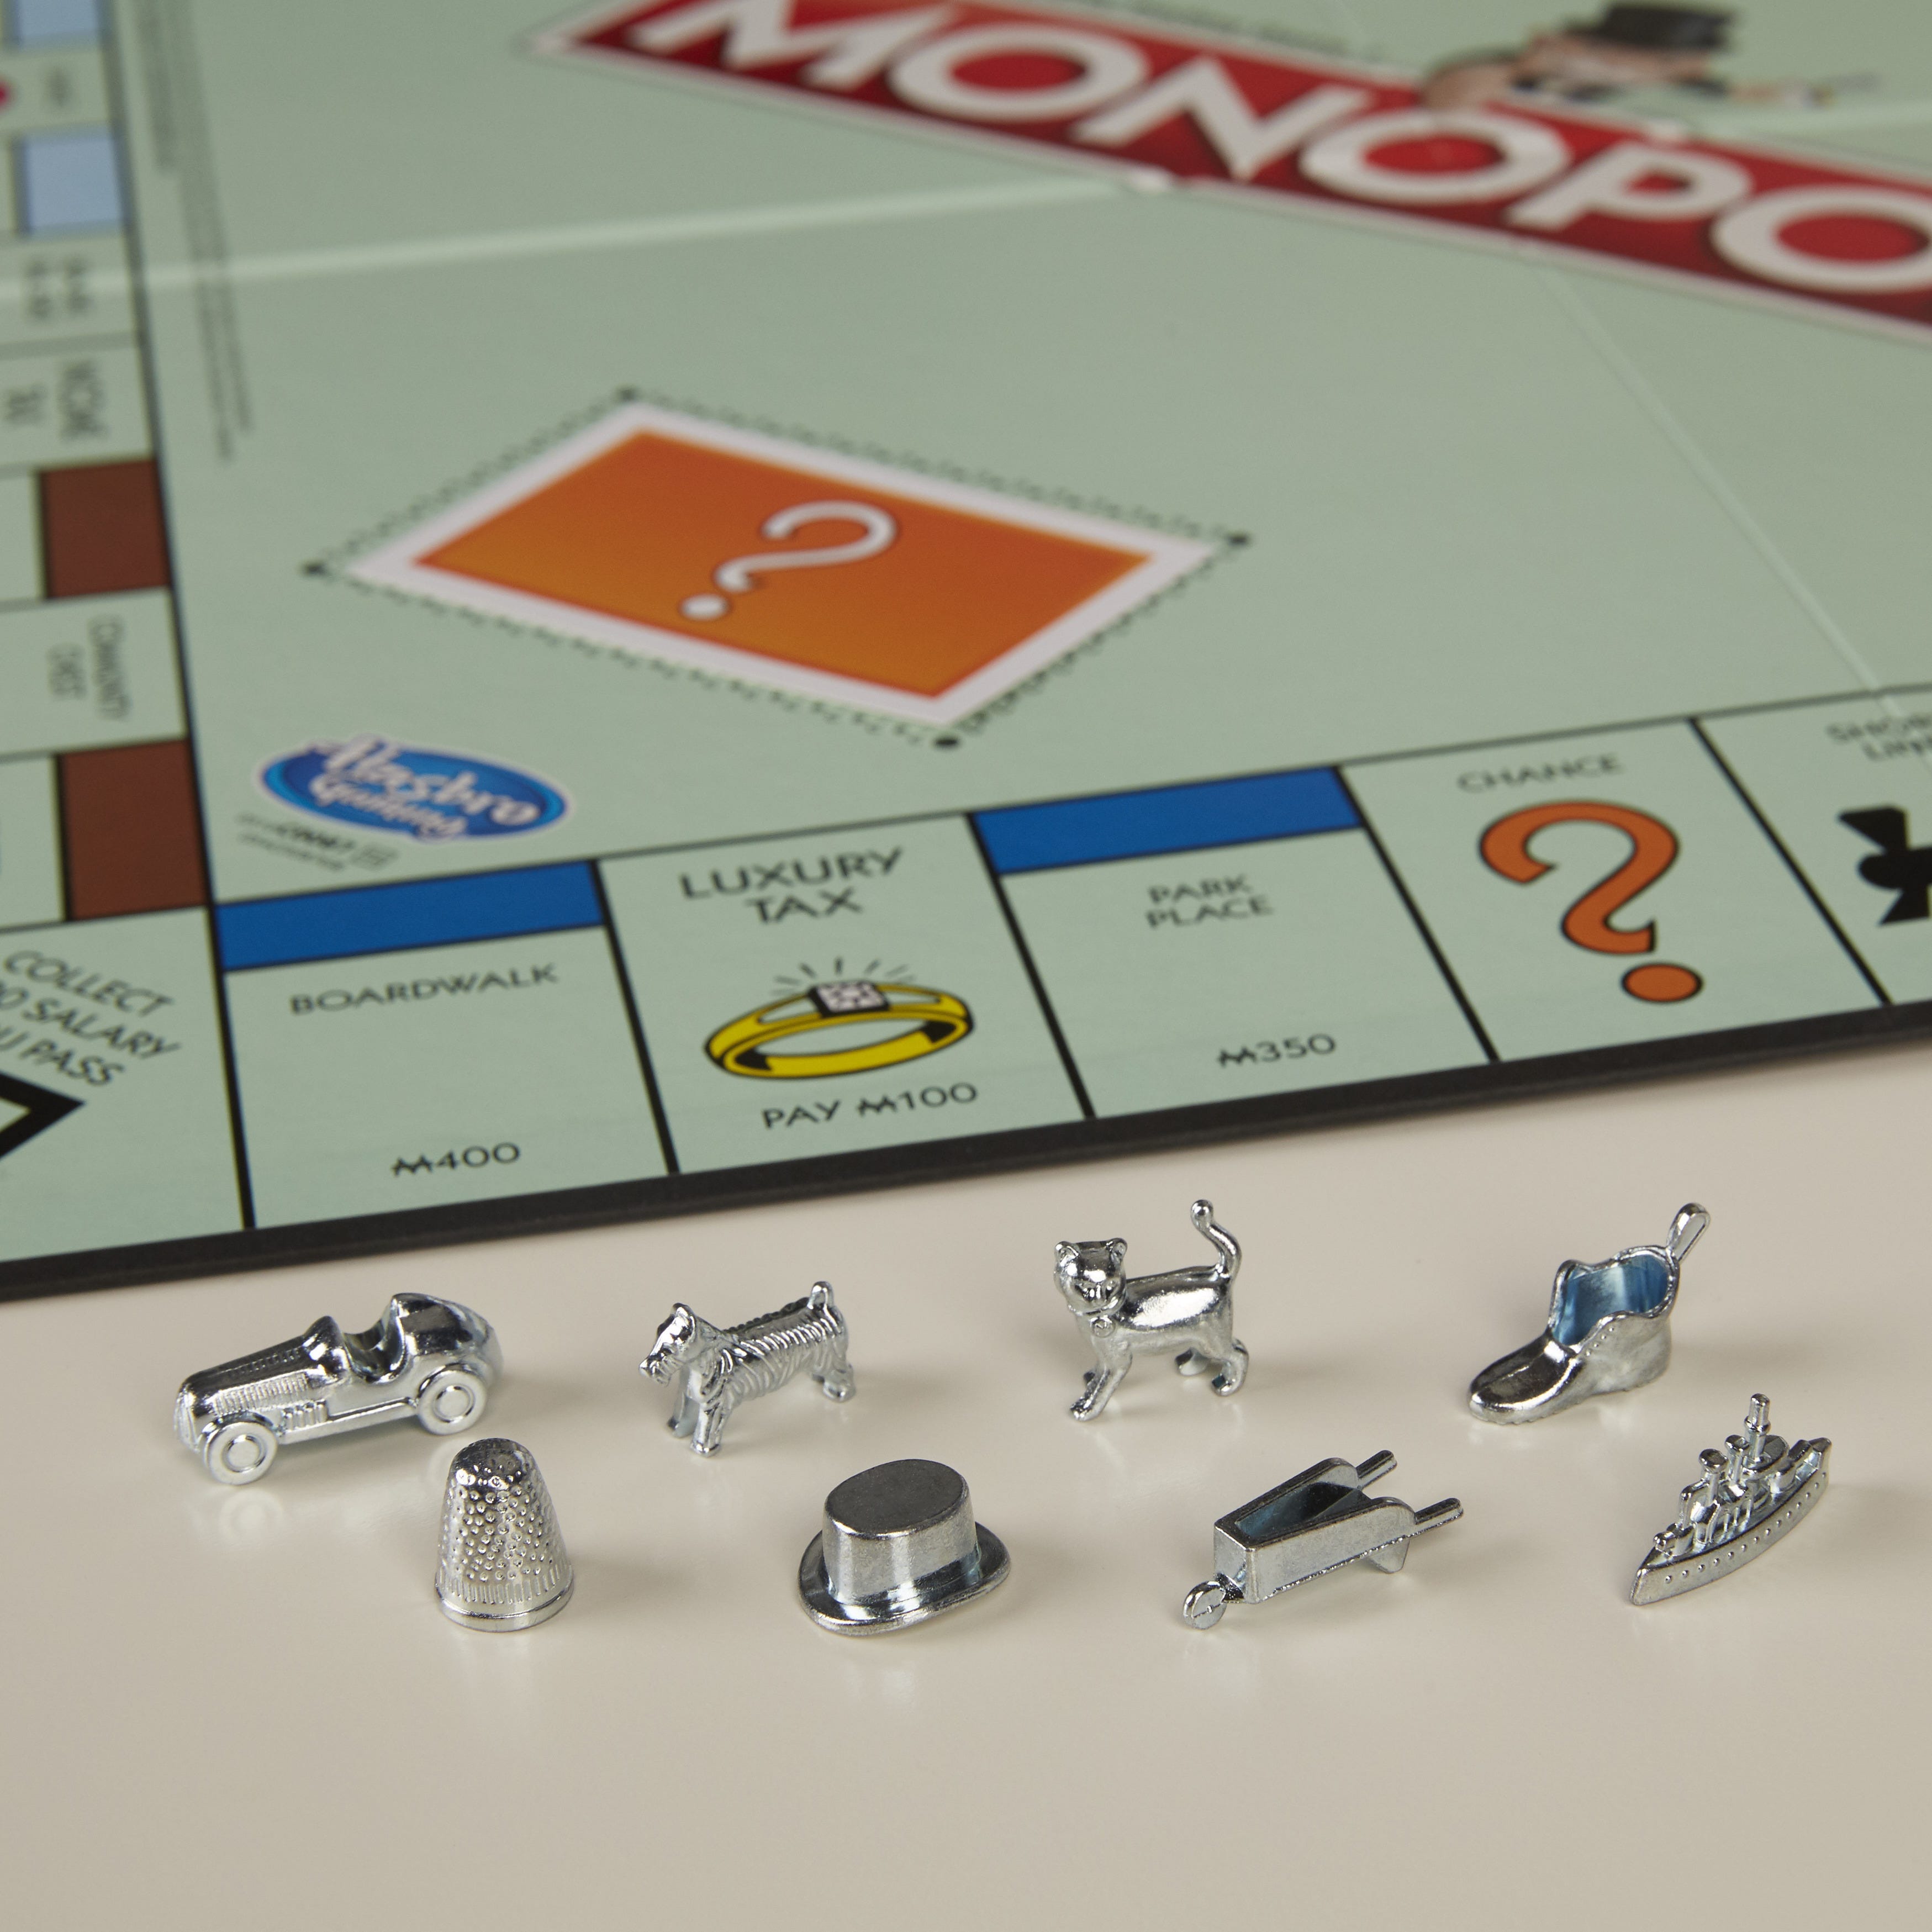 It's game over for the Monopoly thimble